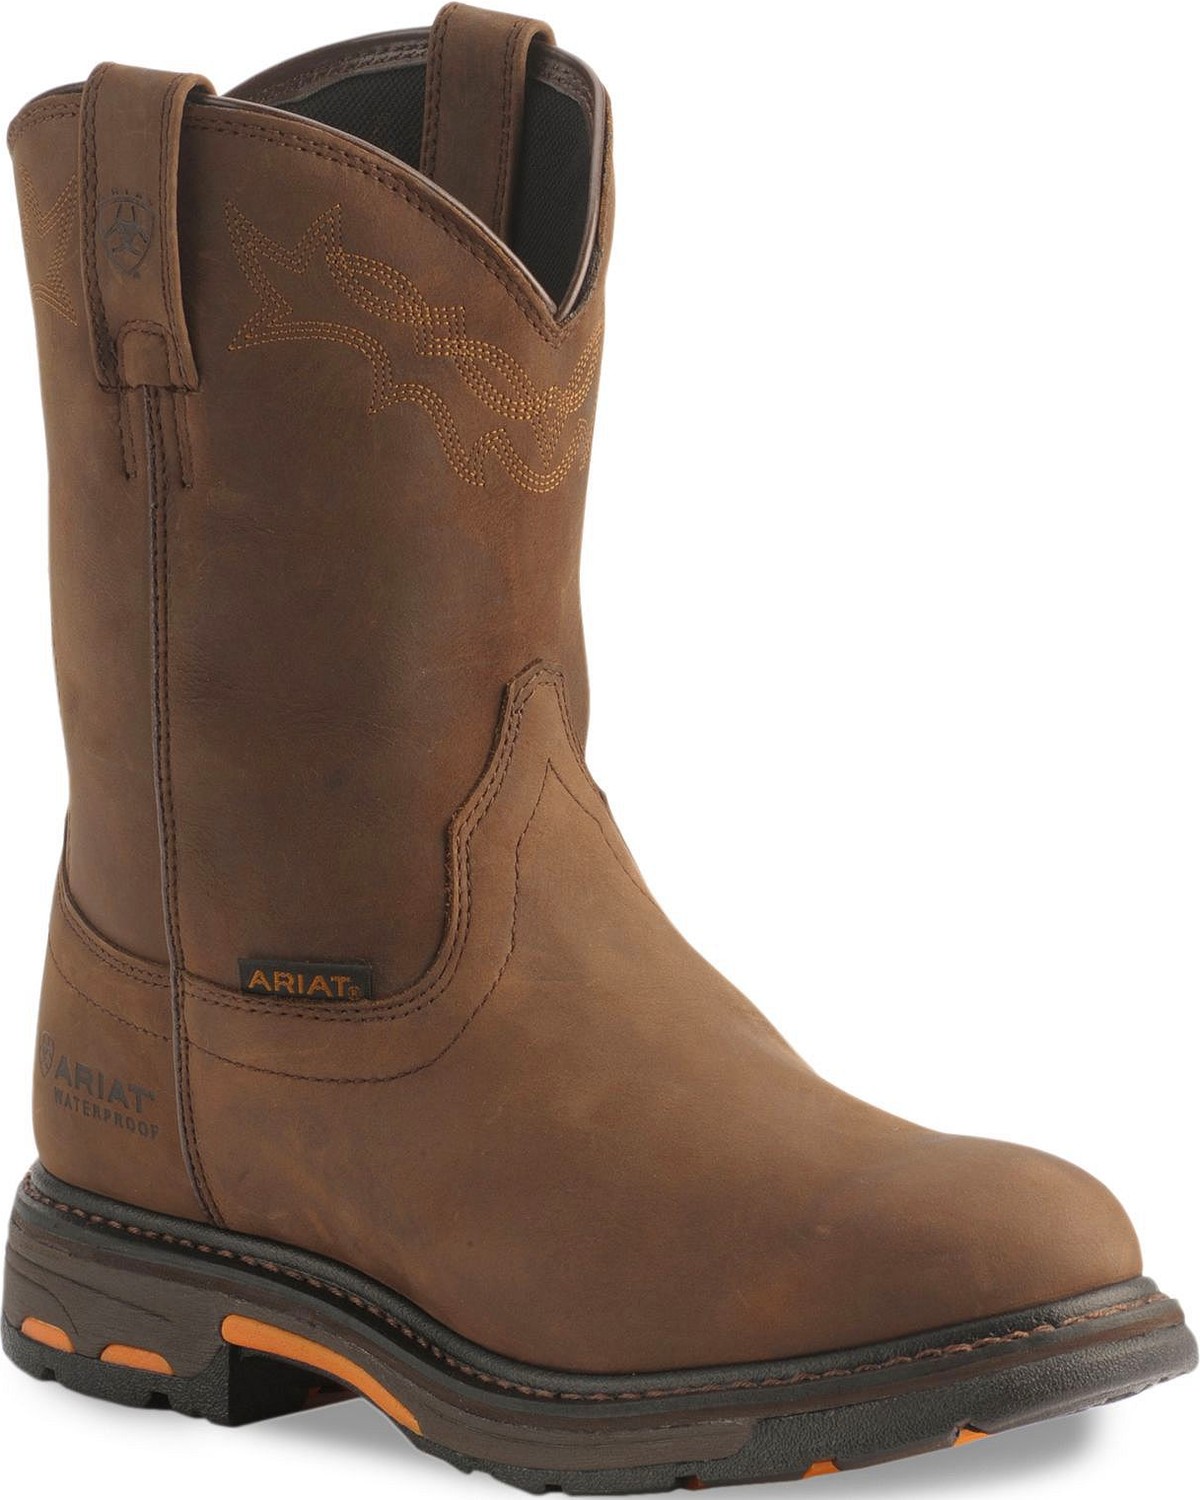 Ariat H2O WorkHog® Work Boots - Composite Toe